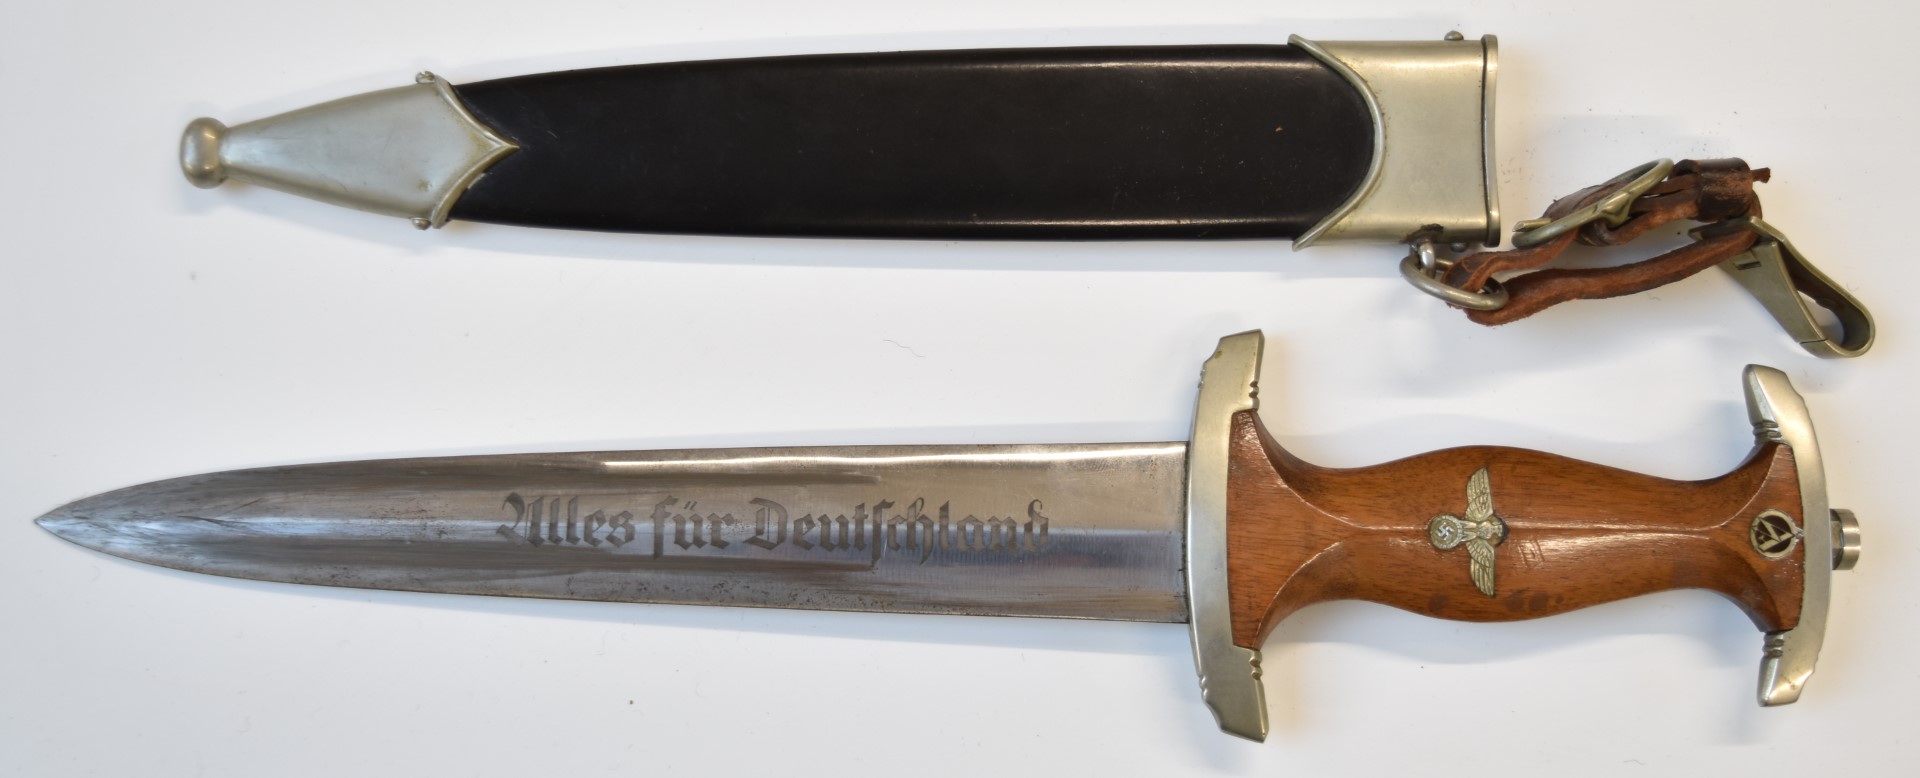 German Third Reich Nazi SA dagger, shaped wooden grip with inset SA roundel and eagle swastika